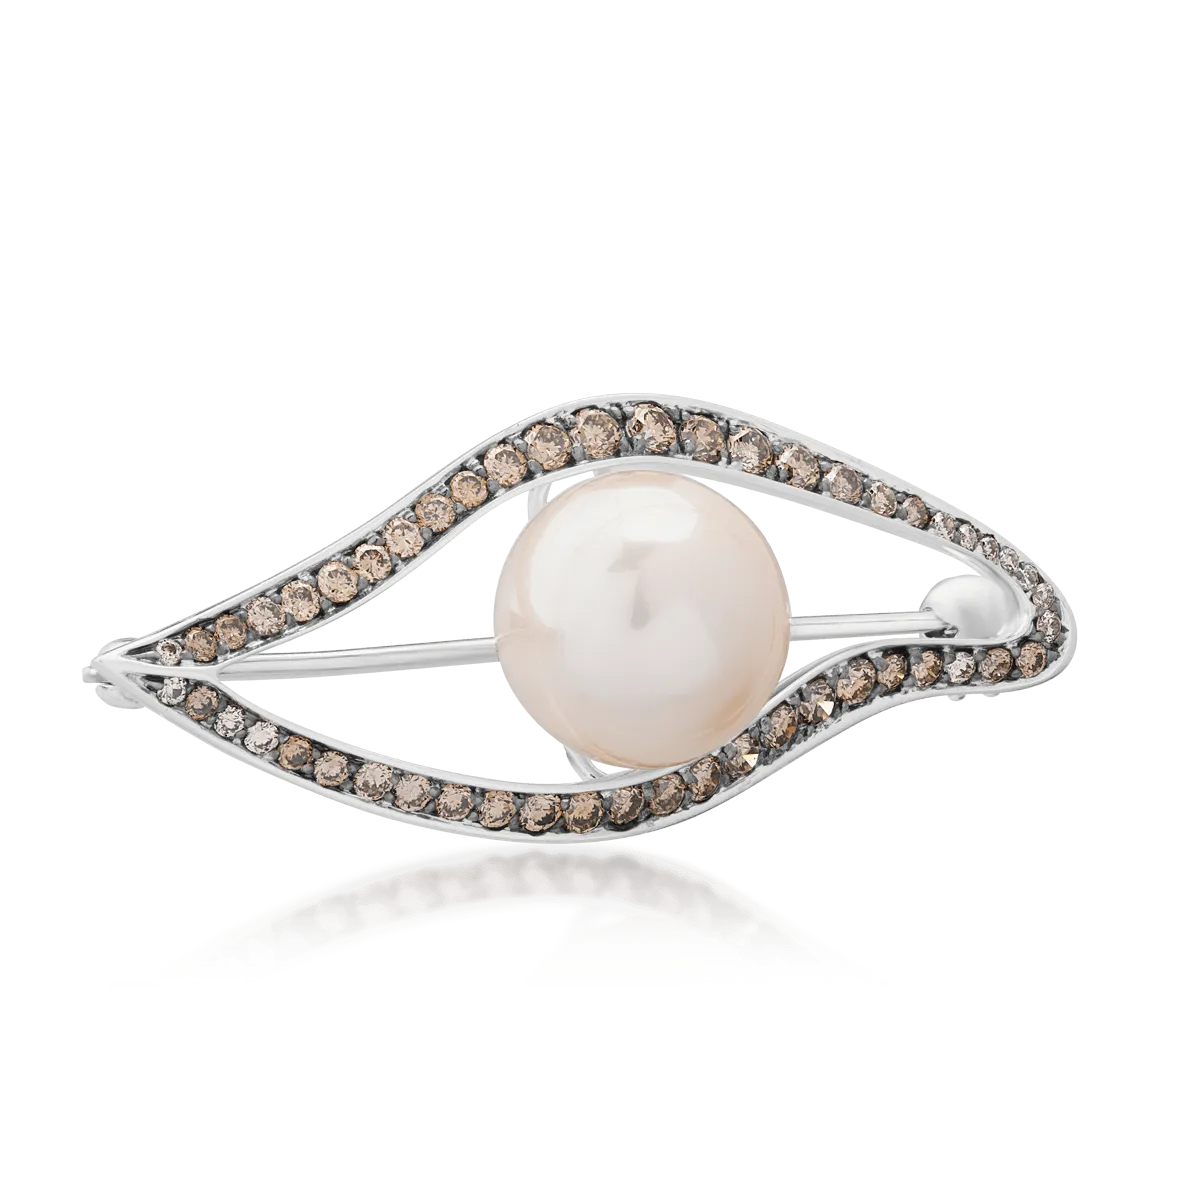 18K white gold brooch with 1ct freshwater cultured pearl and 0.77ct brown diamonds